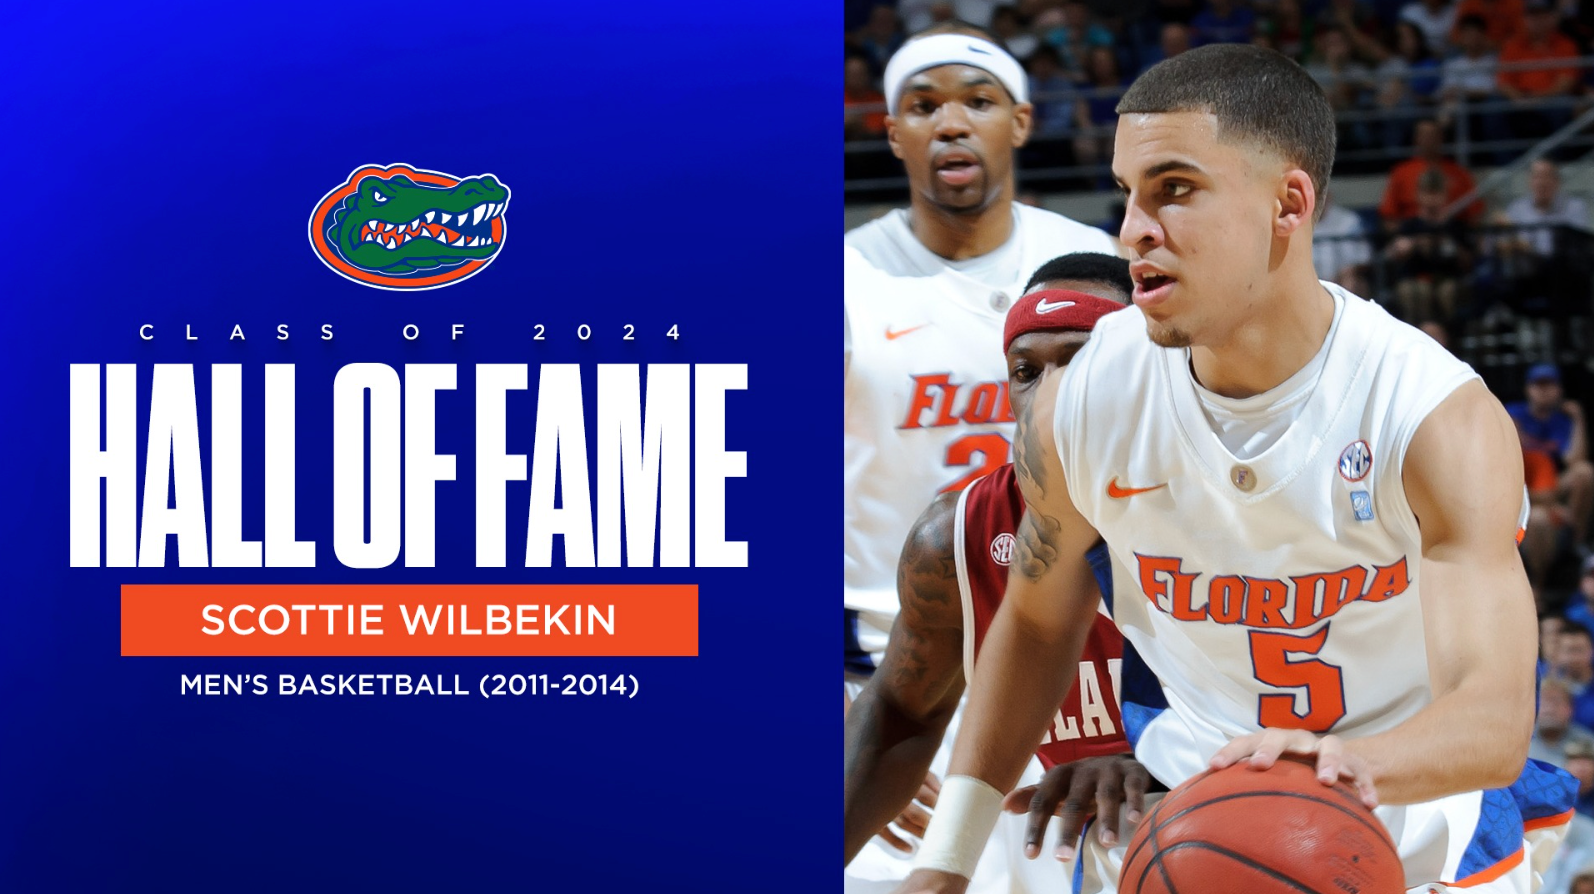 Image of Scottie Wilbekin from UF Men's Basketball. Photo credit to 
https://floridagators.com/news/2024/4/17/general-2024-uf-athletic-hall-of-fame-class-announced.aspx
GAINESVILLE, Fla. — A storied group of Gators is set to be inducted into the 2024 UF Athletic Hall of Fame class, the University of Florida F Club and Gator Boosters announced on Wednesday.
The F Club Committee chooses UF Athletic Hall of Fame inductees based on three categories: Gator Greats, Distinguished Letterwinners, and Honorary Letterwinners.
The 2024 class is composed of eight Gator Greats and one Honorary Letterwinner.
The list of Gator Greats on this year's class includes Elizabeth Beisel (Women's Swimming & Diving), Marcin Cieslak (Men's Swimming & Diving), Francesca Enea (Softball), Chas Henry (Football), Genevieve LaCaze (Women's Track & Field), Hannah Rogers (Softball), Preston Tucker (Baseball) and Scottie Wilbekin (Men's Basketball). The eight Gator Greats were part of two NCAA and 12 Southeastern Conference title teams and claimed four NCAA and 21 SEC individual crowns.  
 Additionally, former soccer head coach Becky Burleigh will enter as an Honorary Letterwinner.
Gator Greats are Letterwinners who brought recognition and prominence to the University of Florida and themselves by their athletic accomplishments as a student-athlete.
An Honorary Letterwinner is a coach or athletic official (after retirement) who was not a letter winner or athlete at the University of Florida, yet rendered outstanding service to the program through personal time, effort, interest and through many years of continued service.
The Hall of Fame Banquet will occur Friday, October 18, 2023, prior to the Kentucky home football game.
2024 UF Athletic Hall of Fame Inductees
Gator Greats
Elizabeth Beisel | Women's Swimming, 2010-14
Elizabeth Beisel
A standout athlete at Florida, Elizabeth Beisel left her mark in the Orange & Blue. Beisel claimed nine SEC Championships from 2011-14 in events such as the 200 IM, 400 IM and 200 back on top of a 2012 NCAA Championship in the 200 Back and a 2013 NCAA Championship in the 400 IM. Her remarkable performances led to 20 All-SEC selections, 18 All-American selections, three-time SEC Championships Female Recipient of the Commissioner's Trophy (High Point Award) and was named 2010's SEC Women's Freshman of the Year.
Throughout her career with the Gators, Beisel set top-three UF all-time marks in 15 different events including the 400 IM (3:58.35), which remains the top spot in program history. Beyond her athletic achievements, she was also recognized for her academic excellence. Beisel earned a 2012 Capital One Academic All-America Women's At-Large First Team Selection and was named the 2013 Capital One Academic Women's At-Large All-America of the Year.
Beisel's illustrious career extended beyond college as she competed on both the national and international stage. As a member of the U.S. National Team, she is a two-time Olympian and won silver (400 IM) and bronze (200 back) at the 2012 Olympics. Additionally, Beisel claimed a 400 IM World Championship title in 2011.
Marcin Cieslak | Men's Swimming, 2011-14
Marcin Cieslak
A Poland native, Marcin Cieslak had an illustrious career at the University of Florida. From 2011-14, Cieslak earned 23 All-SEC selections on top of 25 All-American selections. Competing in the 200 & 400 Medley Relay, 100 fly, 200 fly, 200 IM, and 200 Free, Cieslak won nine separate SEC championships. In 2014, he won NCAA Championships in the 200 IM and 100 fly.
Cieslak got numerous recognitions for both his remarkable performances in the pool and in the classroom. In 2011, Cieslak was named the SEC Male Freshman Swimmer of the Year to go along with a CSCAA Division I Scholar All-American honor. The season after her claimed the SEC Commissioner's Trophy (High Point Award) and SEC Male Swimmer of the Year title.
Cieslak cemented himself in the UF all-time rankings in 10 different events during his time, with top-three times in Gators' history. He remains third all-time in the 200-yard fly and sixth in both the 100-yard fly and 200-yard IM.
Competing in the 2011 FINA World Championship, Cieslak showcased his talent on the international stage. He was a 2012 Olympian as a member of the Poland National Team swimming a time of 1:57.07 in the 200 fly and 2:00.45 in the 200 IM.
Francesca Enea | Softball, 2007-10
Francesca Enea 
Enea is one of the latest softball inductees to the UF Athletic Hall of Fame along with Hannah Rogers this year. She joins Chelsey Sakizzie (2008), Jenny Gladding (2014), Stacey Nelson (2019), Michelle Moultrie (2022) and Kelsey Bruder (2023) among the Gator Greats to come through the program.
Over her storied career, Enea was tabbed a three-time National Fastpitch Coaches Association (NFCA) All-American in 2008, 2009 and 2010 in addition to being a two-time All-SEC selection in 2009 and 2010 and made the All-SEC Freshman Team in 2007. In 2009, Enea was a Top 25 finalist for the USA Softball Player of the Year, most prestigious awards in college softball, and was a Top 10 finalist in 2010. She also helped lead UF to a pair of SEC Regular Season and Tournament Titles in 2008 & 2009
Enea's name can be found all over the UF history books as she finished her career as the record holder in single-season home runs (20), single-season RBI (70), single-season SAC flies (6-tied), single-season hit by pitch (15), career home runs (61), career RBI (221) and career total bases (431). In addition, the Woodland Hills, Calif., native, finished her career ranked inside the Top 10 of seven other single-season categories and 10 other career categories by the time her career ended.
Academically, Enea made the SEC Academic Honor Roll (2008, 2009 and 2010) and SEC Freshman Academic Honor Roll (2007), while also earning SEC Community Service Team honors in 2009 and 2010.
Chas Henry | Football, 2007-10
Chas Henry
Chas Henry was a punter for the Gators football team from 2007-10. He served as the starting punter for Florida all four seasons, including the BCS National Championship team in 2008. Henry started 54 consecutive games, which is a program record that still holds today. He ranks sixth all-time in career punts (165), yards per punt (43.0), fourth in longest punt (75) and was Florida's last true freshman to start the season opener. 
He won the Ray Guy Award in his senior year in 2010 and was a finalist in 2009 and a semifinalist in 2008. Henry still holds the distinction of being the school's only award winner. He also is the Gators only punter to be named a Consensus All-American in 2010. That season, he set the single-season record at the time of 45.1 yards per punt with 16 of his 50 punts going 50 yards or more. Henry also earned All-SEC selection by the AP and Coaches that season. 
The Dallas, Ga. native kicked a 37-yard game-winning field goal in the Gators 34-31 overtime victory over Georgia in 2010 after replacing an injured Cale Sturgis. Henry was a three-time SEC Honor Roll member and signed as a free agent with the Philadelphia Eagles in 2011.
Genevieve LaCaze | Women's Track and Field, 2008-12
Genevieve LaCaze
Genevieve LeCaze, Florida's school record hodler in the 3000m Steeplechase, enjoyed an outstanding career during her time in Gainesville from 2009-12. LeCaze became the first Gator to ever break the ten minute mark in the Steeplechase when she recorded a time of 9:50.25 at the 2012 NCAA Outdoor Championships.
In addition to her school record time, which has stood for twelve years, LeCaze was a three time SEC Outdoor Champion and one time and one time NCAA Runner-Up in the Steeplechase. LeCaze found success in other events as well. During her senior season she became the first women in SEC history to sweep the 1500m, 3000m and 5000m events at the SEC Outdoor Championships.
LeCaze was a four time All-American and six time All-SEC selection. During her dominant 2012 season, LeCaze was named the USTFCCCA South Region Women's Track Athlete of the Year and SEC Women's Co-Runner of the Year. She also earned Outdoor Freshman Runner of the Year in 2009.
She continued her career on the professional level as an Olympic athlete, competing in both the 2012 London and 2016 Rio Olympics. In London, LeCaze finished ninth in her heat (22nd overall) in the 3000m Steeplechase, setting a personal record of 9:37.90 in the process. In Rio, she competed in both the Steeplechase and the 5000m finishing ninth and twelfth, respectively, with times of 9:21.21 and 15:10.35.
Hannah Rogers | Softball, 2011-14
Hannah Rogers
Rogers is one of the latest softball inductees to the UF Athletic Hall of Fame along with Francesca Enea this year. She joins Chelsey Sakizzie (2008), Jenny Gladding (2014), Stacey Nelson (2019), Michelle Moultrie (2022) and Kelsey Bruder (2023) among the Gator Greats to come through the program. Overall, the softball program now has seven Hall of Fame inductees.
Rogers is a legend in the circle for the softball program as she was the first four-time National Fastpitch Coaches Association (NFCA) All-American in program history. The Lake Wales, Fla., native is also the first to be inducted that was a part of the program's first Women's College World Series (WCWS) National Championship in 2014. Not only did she help lead the program to its first national title, Rogers was named the 2014 WCWS Most Outstanding Player. Rogers accolades also include 2014 Southeastern Conference Female Athlete of the Year, All-SEC (2011, 2012, 2013 and 2014), All-SEC Defensive Team (2011, 2012 & 2014) in addition to being selected to the 2011 All-SEC Freshman Team.
Fans can find her name across the record books as well. She set the single-season record for saves (5) and finished inside the Top 10 in in 13 different categories. In the career categories she finished in the Top 10 in 13 different spaces and in the Top 5 in opponent batting average (.198 – 5th), walks allowed per seven innings (2.08 – 5th), wins (127 – 2nd), win percentage (.804 – 5th), save (14 – 2nd), appearances (191 – 2nd), starts (146 - 2nd), innings pitched (988.0 – 2nd) and strikeouts (833 – 2nd).
Academically, Rogers was a 2013 & 2014 SEC Academic Honor Roll selection.
Preston Tucker | Baseball, 2009-12
Preston Tucker
As Florida's all-time hits leader, infielder/outfielder Preston Tucker enjoyed an illustrious career in Orange & Blue from 2009-12. On top of 341 hits, Tucker owns program records in at bats (1,035), doubles (70), RBI (258) and total bases (596). He ranks second all-time in games played (265), second in starts (259), second in homers (57) and sixth in runs scored (210).
Florida advanced to the College World Series in each of Tucker's final three seasons as a Gator, marking the program's first appearances in Omaha under head coach Kevin O'Sullivan. Tucker also helped power the Gators to a pair of SEC Championships in 2010 and 2011.
Tucker was named an All-American and All-SEC selection in 2011 and 2012. Most notably, the Tampa, Fla. native holds status as the only player in team history to earn Regional All-Tournament Team honors in all four years of his career. In both 2009 and 2011, Tucker was named the Regional Most Outstanding Player.
Finishing his UF career with a .329/.409/.576 slash line across 265 games, Tucker was drafted by the Houston Astros with the 219th overall pick in the seventh round of the 2012 MLB Draft. Still an active player, Tucker has appeared in parts of three MLB seasons with the Astros, Braves and Reds. He owns 23 career home runs and 38 doubles in 243 big-league games.
Scottie Wilbekin | Men's Basketball, 2011-14
Scottie Wilbekin
In his senior season of 2013-14, Scottie Wilbekin became the only Gator in program history to earn SEC Player of the Year, SEC Tournament MVP and NCAA Regional Most Outstanding Player in the same season, doing so while leading Florida to a perfect 18-0 SEC record, SEC regular season and tournament titles, a 30-game win streak, a No. 1 national ranking and the 2014 Final Four. After forgoing his senior season of high school to enroll at UF at 17 years old, Wilbekin immediately became a regular part of Florida's rotation before assuming the starting point guard role in his junior season. The Gainesville native went on to be a two-time All-SEC honoree and two-time SEC All-Defensive Team and still ranks among Florida's all-time leaders in games played (fifth, 143), assists (ninth, 419) and steals (ninth, 167), and his 174 assists in 2012-13 rank as the No. 7 single-season total in team history.
Wilbekin was part of three SEC championship teams (2011, 2013, 2014) and 13 NCAA Tournament wins, advancing to the Elite Eight his first three seasons before leading the Gators to the Final Four as a senior. Alongside Casey Prather, Will Yegeute and Patric Young, Wilbekin's senior class rates as the winningest class in Florida men's basketball history, recording 120 wins with an .800 winning percentage over their four seasons. In addition to 2013-14's record-setting 30-game winning streak, Wilbekin and his class provided the lion's share of the victories in program-record streaks of 33 home wins, nine road wins, 21 SEC wins, 20 home SEC wins and 10 road SEC wins. The Gators recorded 18 top-25 wins over the course of Wilbekin's career.
Wilbekin totaled 953 points over his career, averaging a career-best 13.1 points per game as a senior, including a 15.3 scoring average on .444 3-point shooting over the Gators' seven postseason wins in 2014.
Honorary Letterwinner
Becky Burleigh
Becky Burleigh - Florida Athletics Hall of Fame Class of 2024
Synonymous with the program she took from start to NCAA champions in four seasons, Burleigh's teams consistently challenged for national and Southeastern Conference titles. Florida's 14 team titles leads the SEC and the program earned NCAA Tournament berths 22 times in her 26 seasons with the Gators.
Burleigh's teams achievements include 22 NCAA Championships' berths (1996-2001; 2003-2017; 2019), Two NCAA College Cup appearances (1998, 2001), winning 1998 NCAA title, 14 SEC team titles (1996-2001; 2006-2010; 2012-13, 2015) and 12 SEC Tournament titles (1996-01; 2004; 2007, 2010, 2012, 2015-16) 
The 1998 NSCAA/adidas National Coach of the Year after leading the four-year old Gator soccer program to that season's national title, Burleigh also was tabbed as the SEC Coach of the Year five times (2012, 2010, 2008, 2000 & 1996). Twenty-two Gators claimed 37 United Soccer Coaches All-America honors and Danielle Fotopoulos was the 1998 Honda Award winner as national player of the year. SEC Player of the Year accolades were claimed by 11 players 15 times.